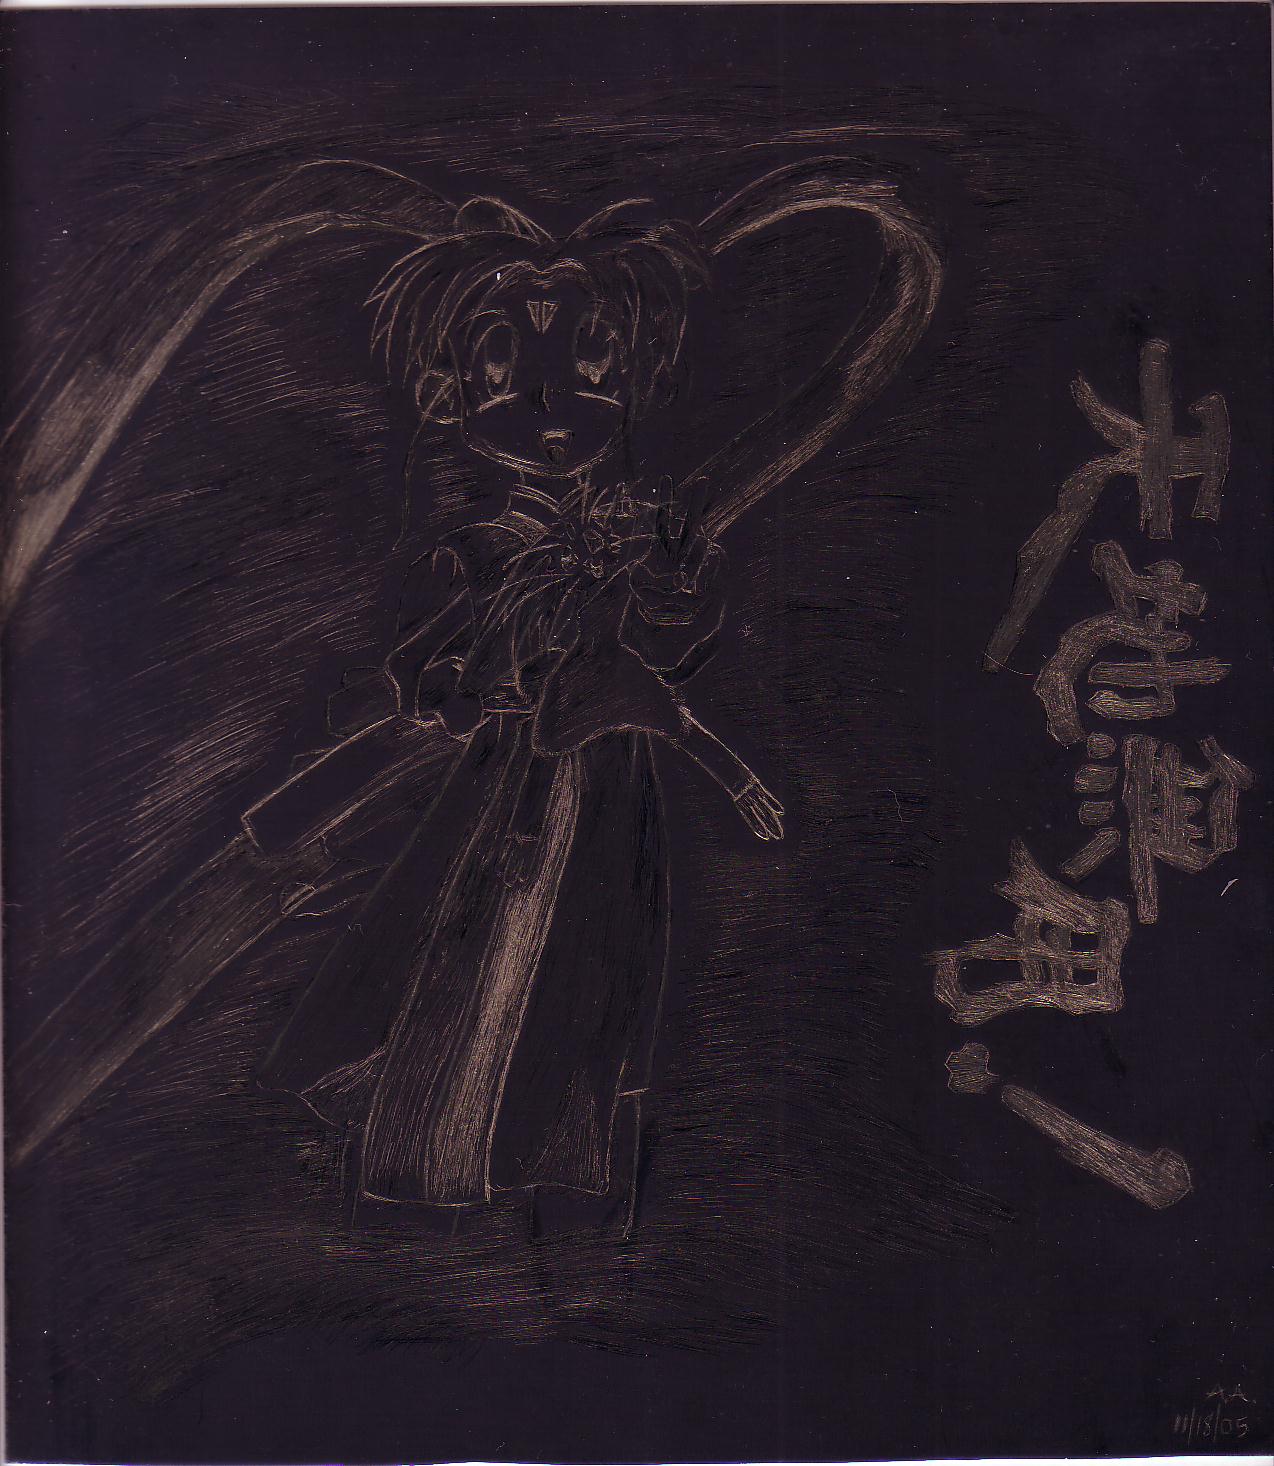 Sasami (my first scratch art) by mendoza0089